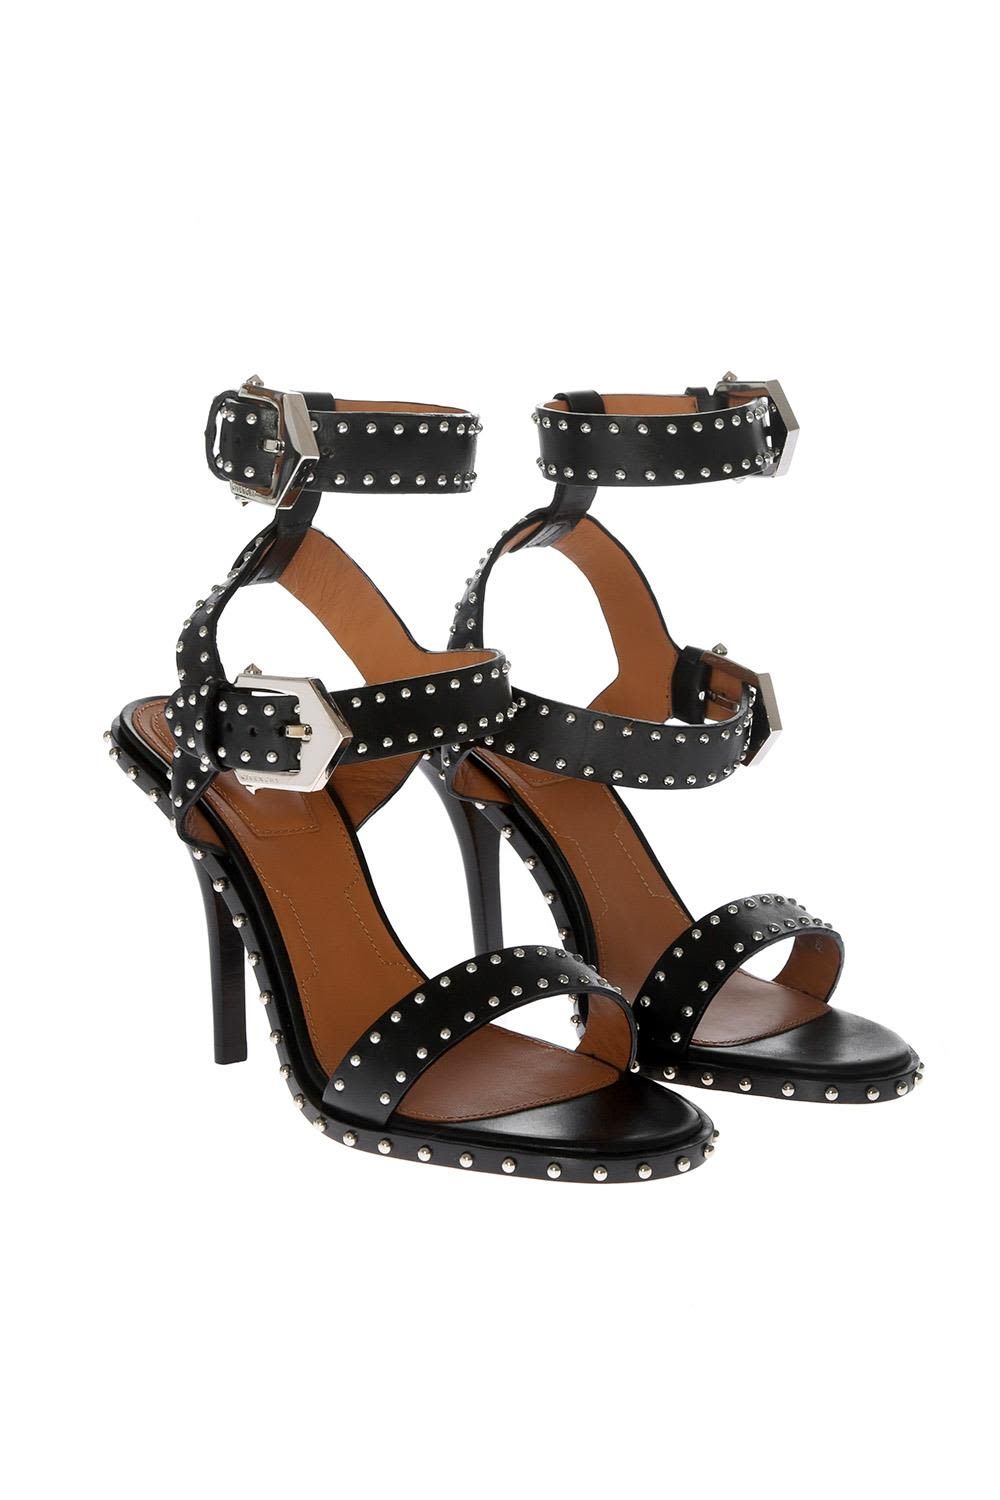 Givenchy Studded Sandals | Italist.com US